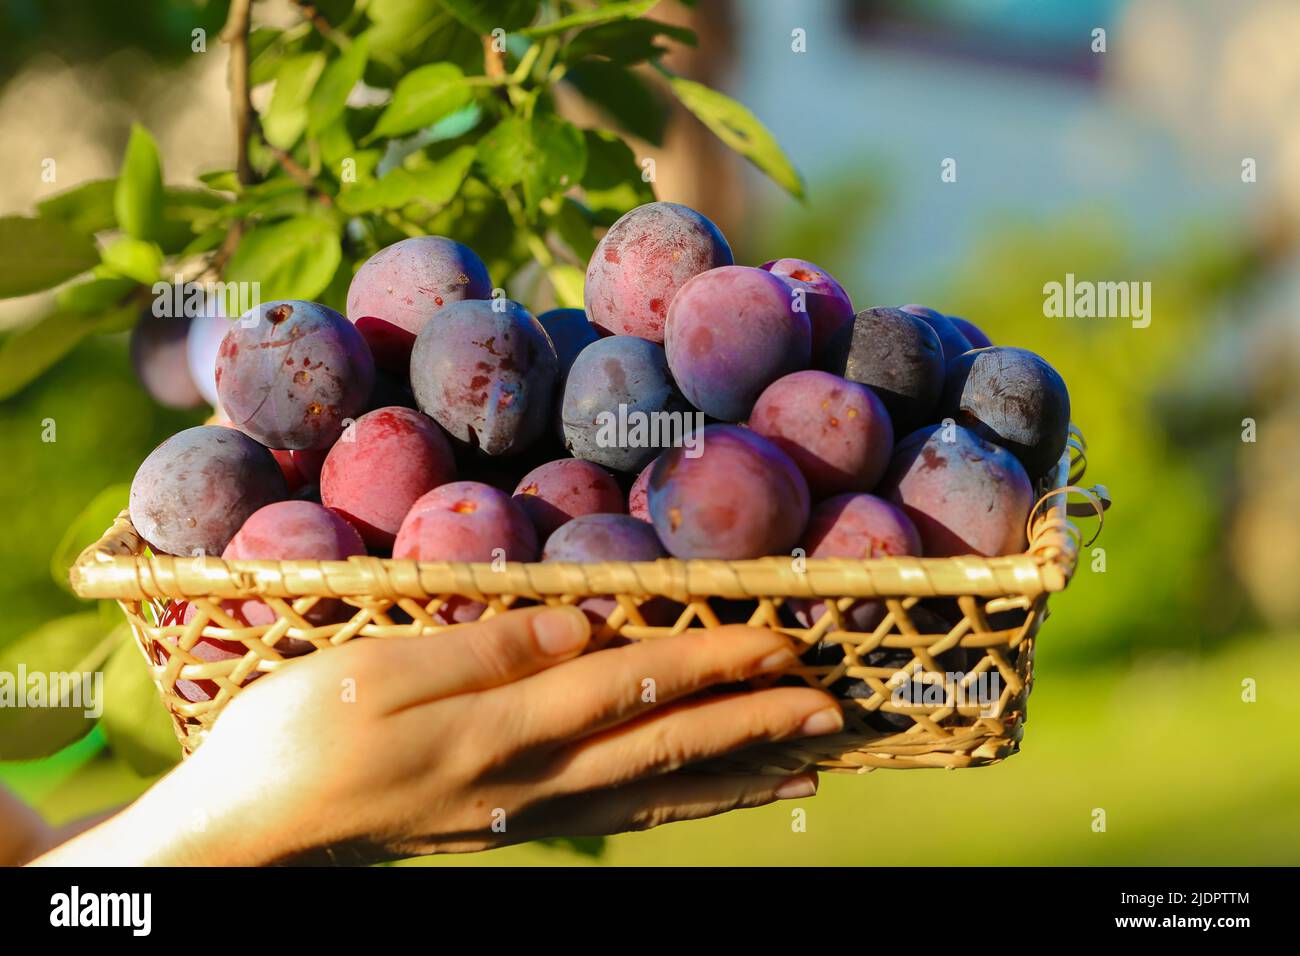 Plums harvest.Ripe Plums in a wicker basket in the sun in the summer garden.Fresh plums set in hands. organic fruits. plum abundance Stock Photo